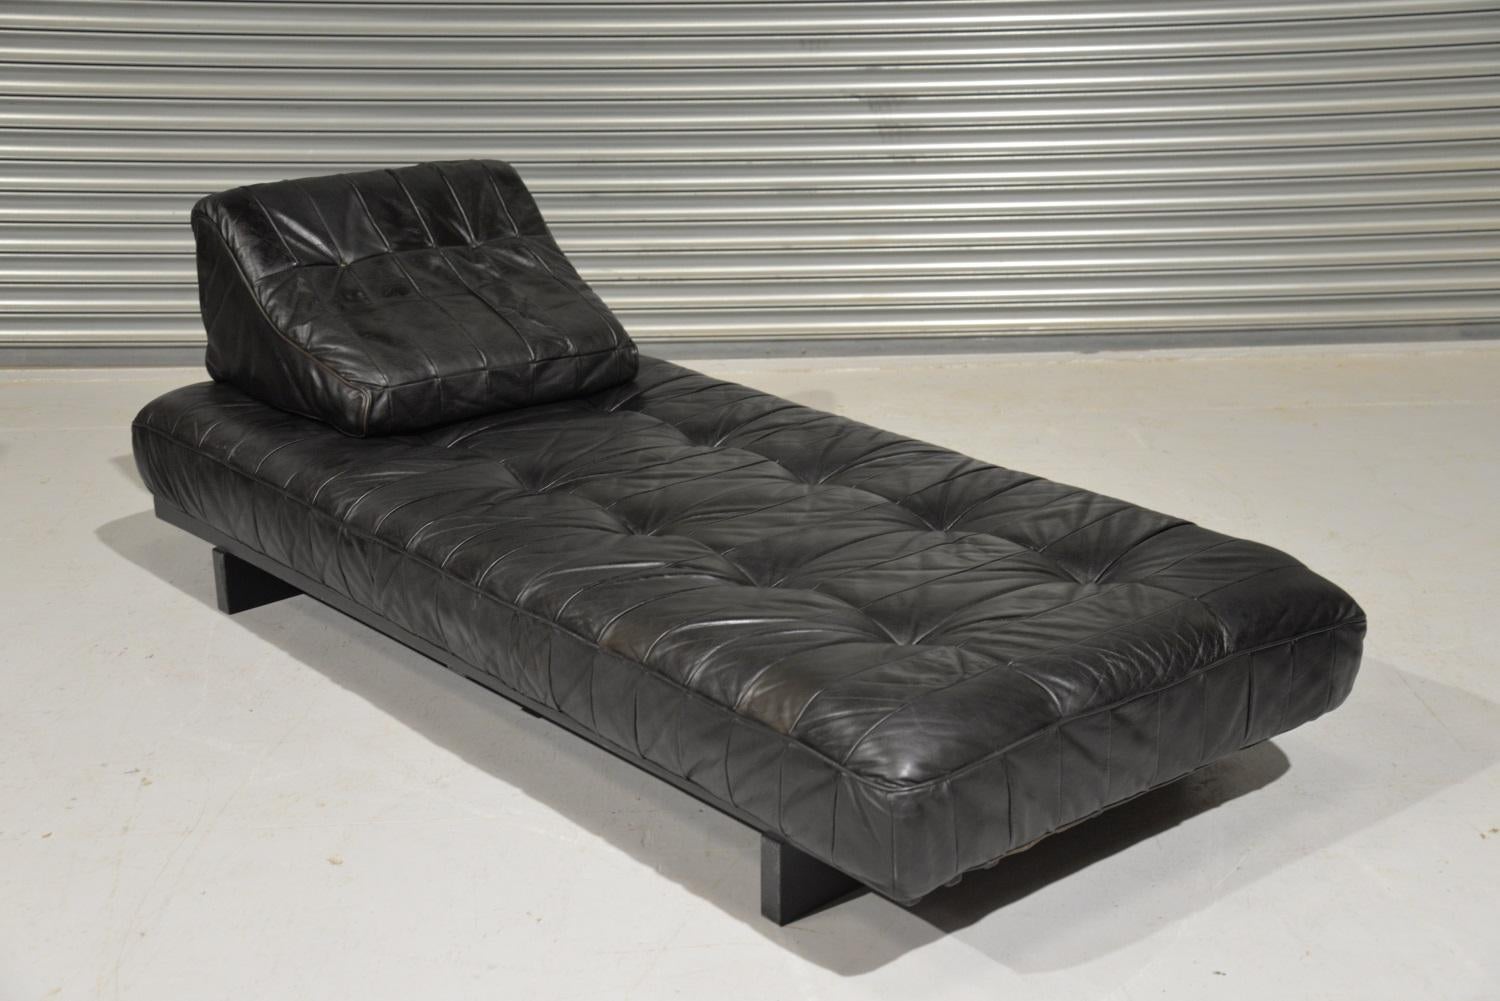 Vintage De Sede DS 80 Patchwork Leather Daybed, Switzerland, 1960s For Sale 4